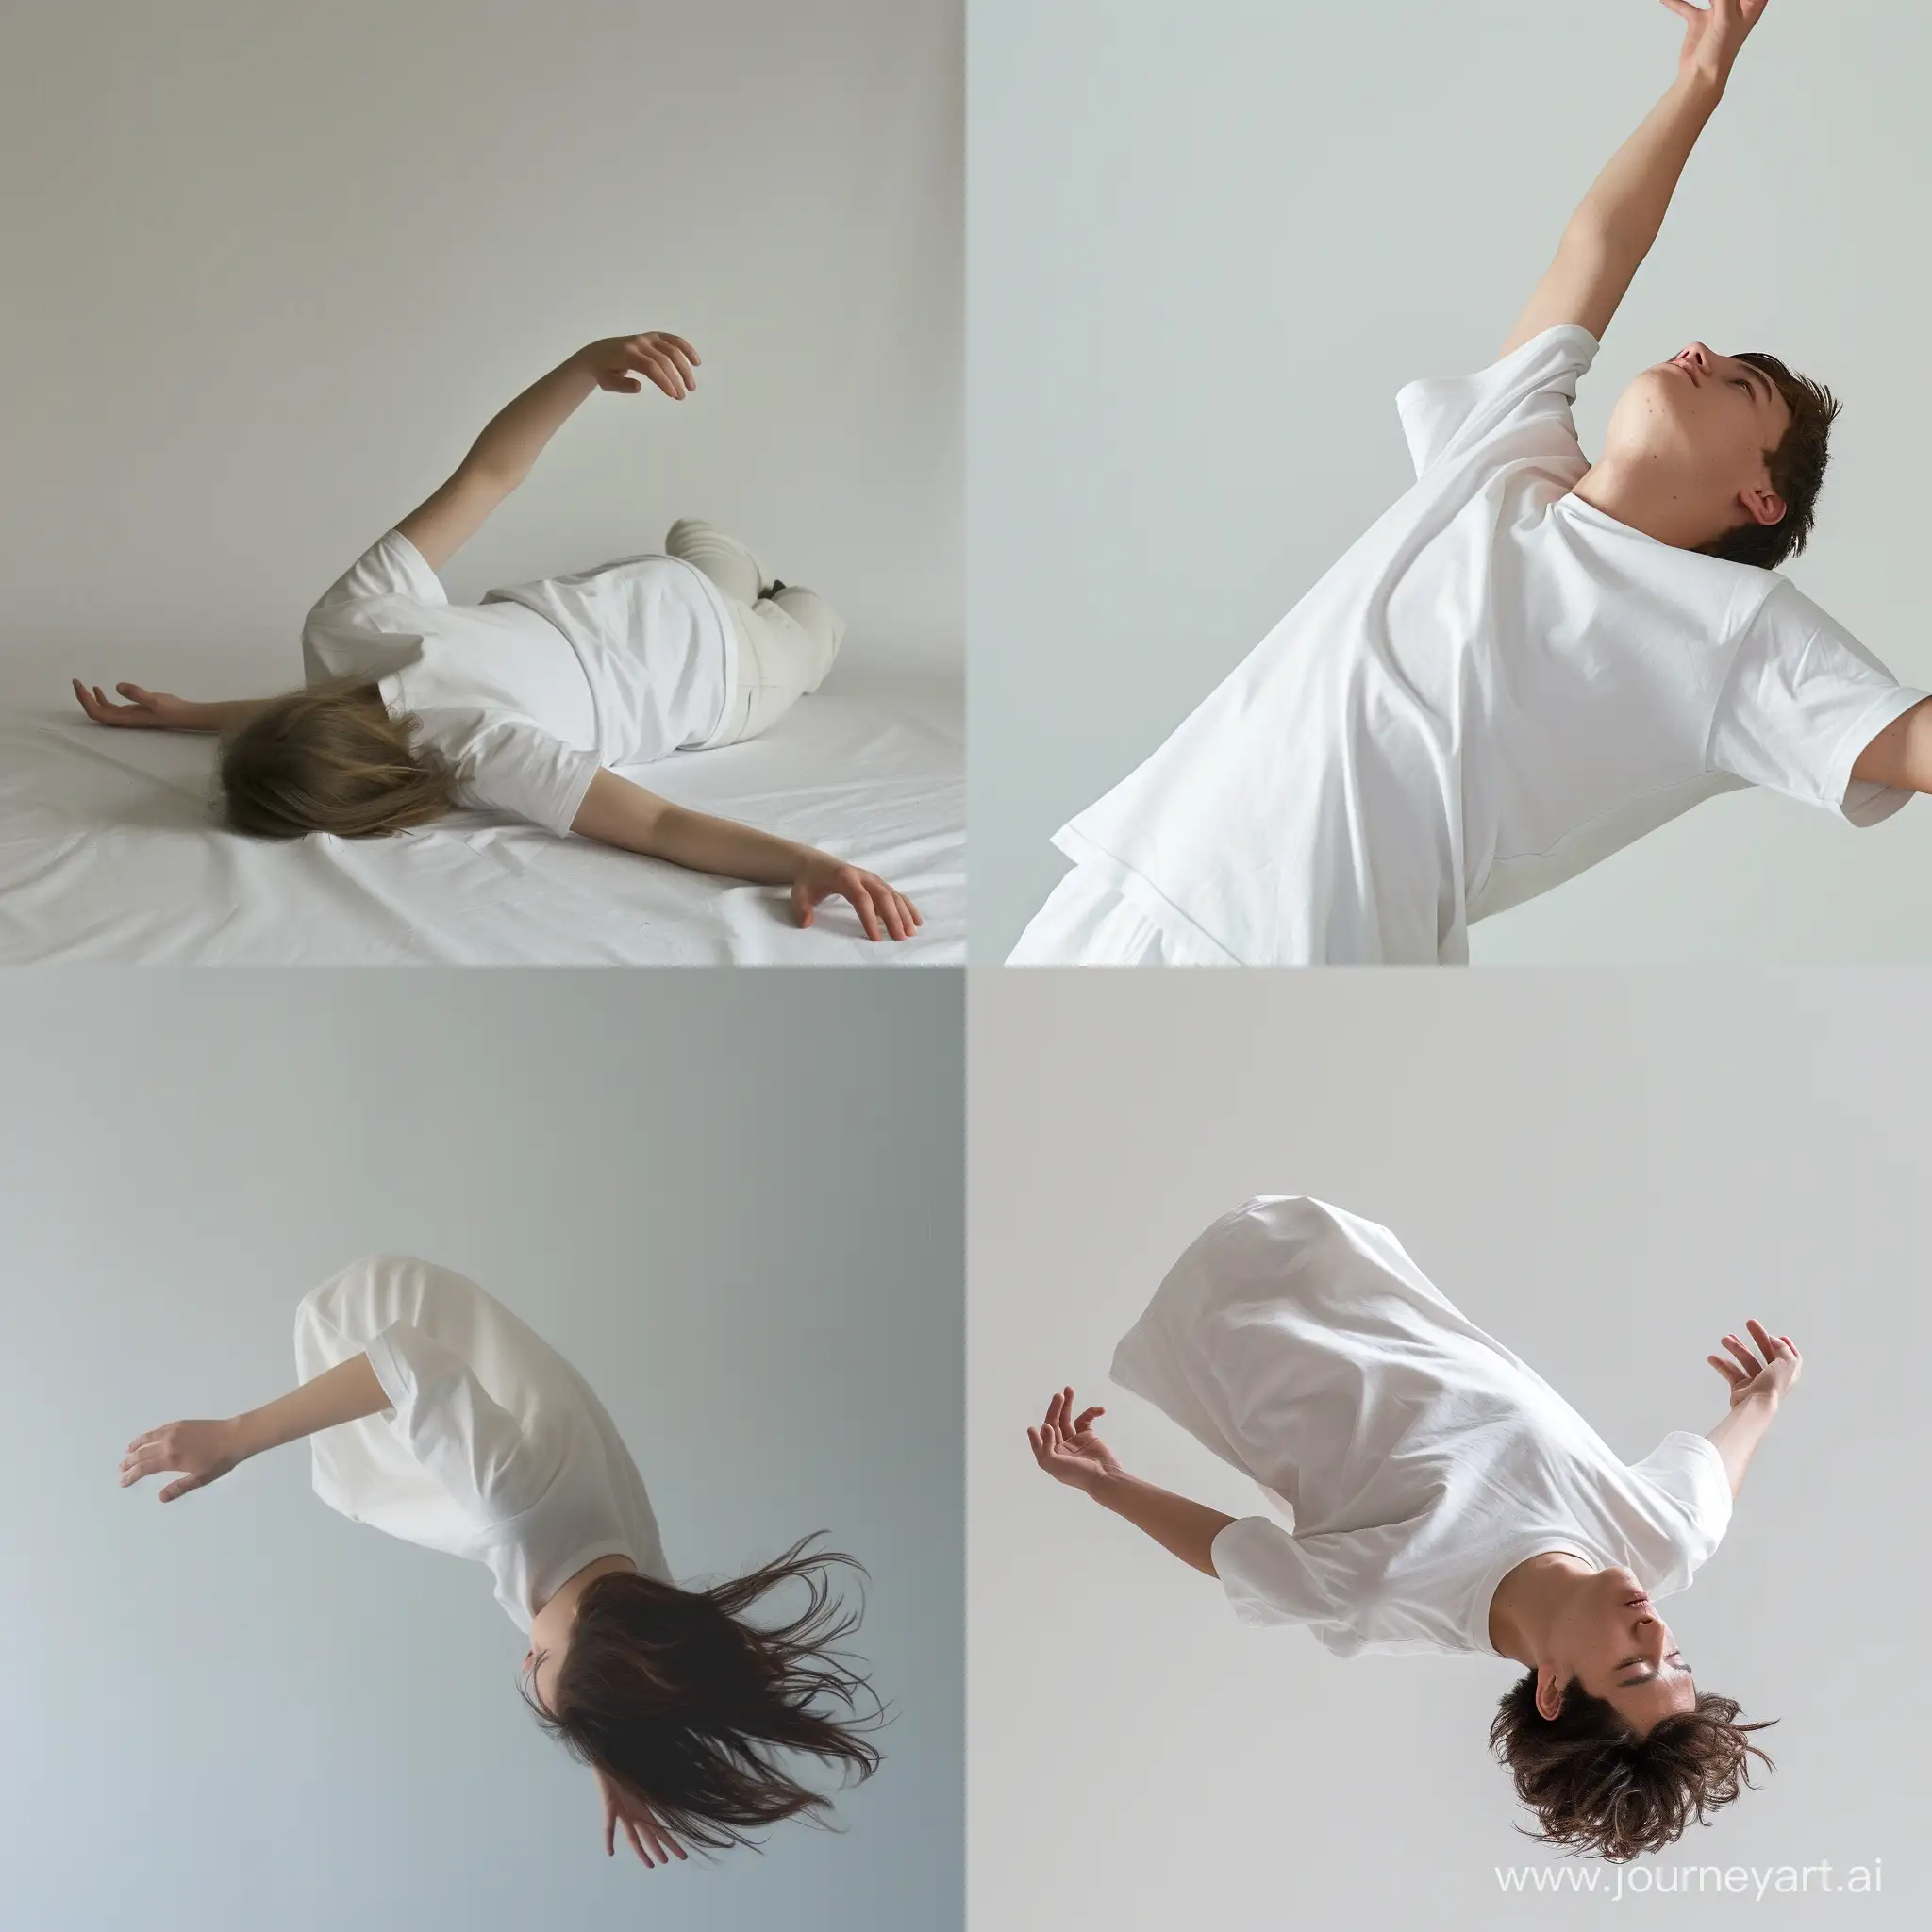 Individual-in-White-TShirt-Experiencing-Gravity